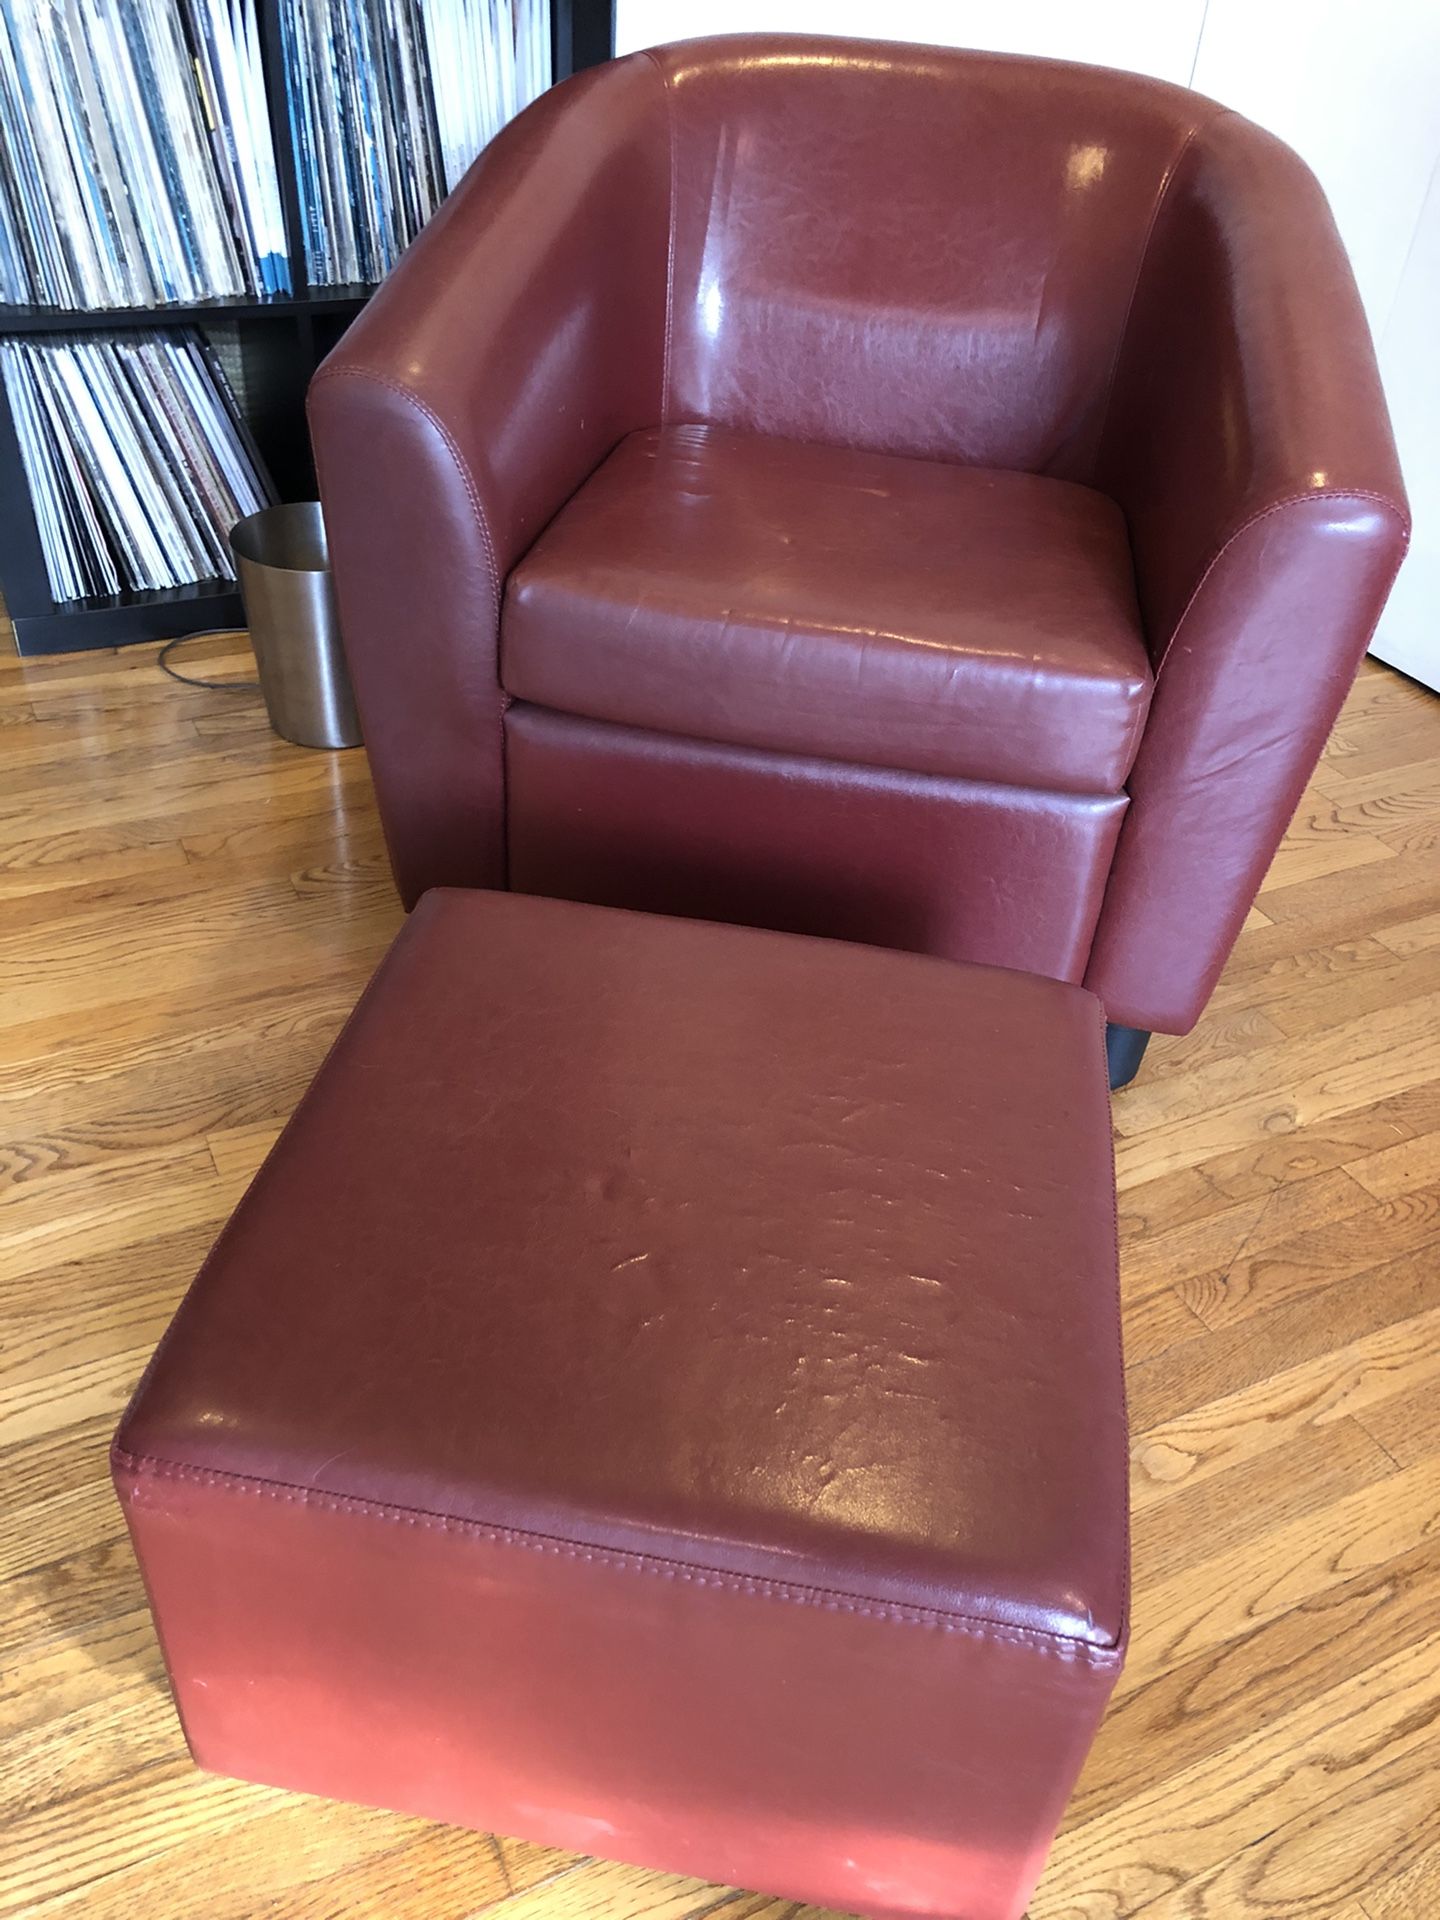 Red chair and ottoman